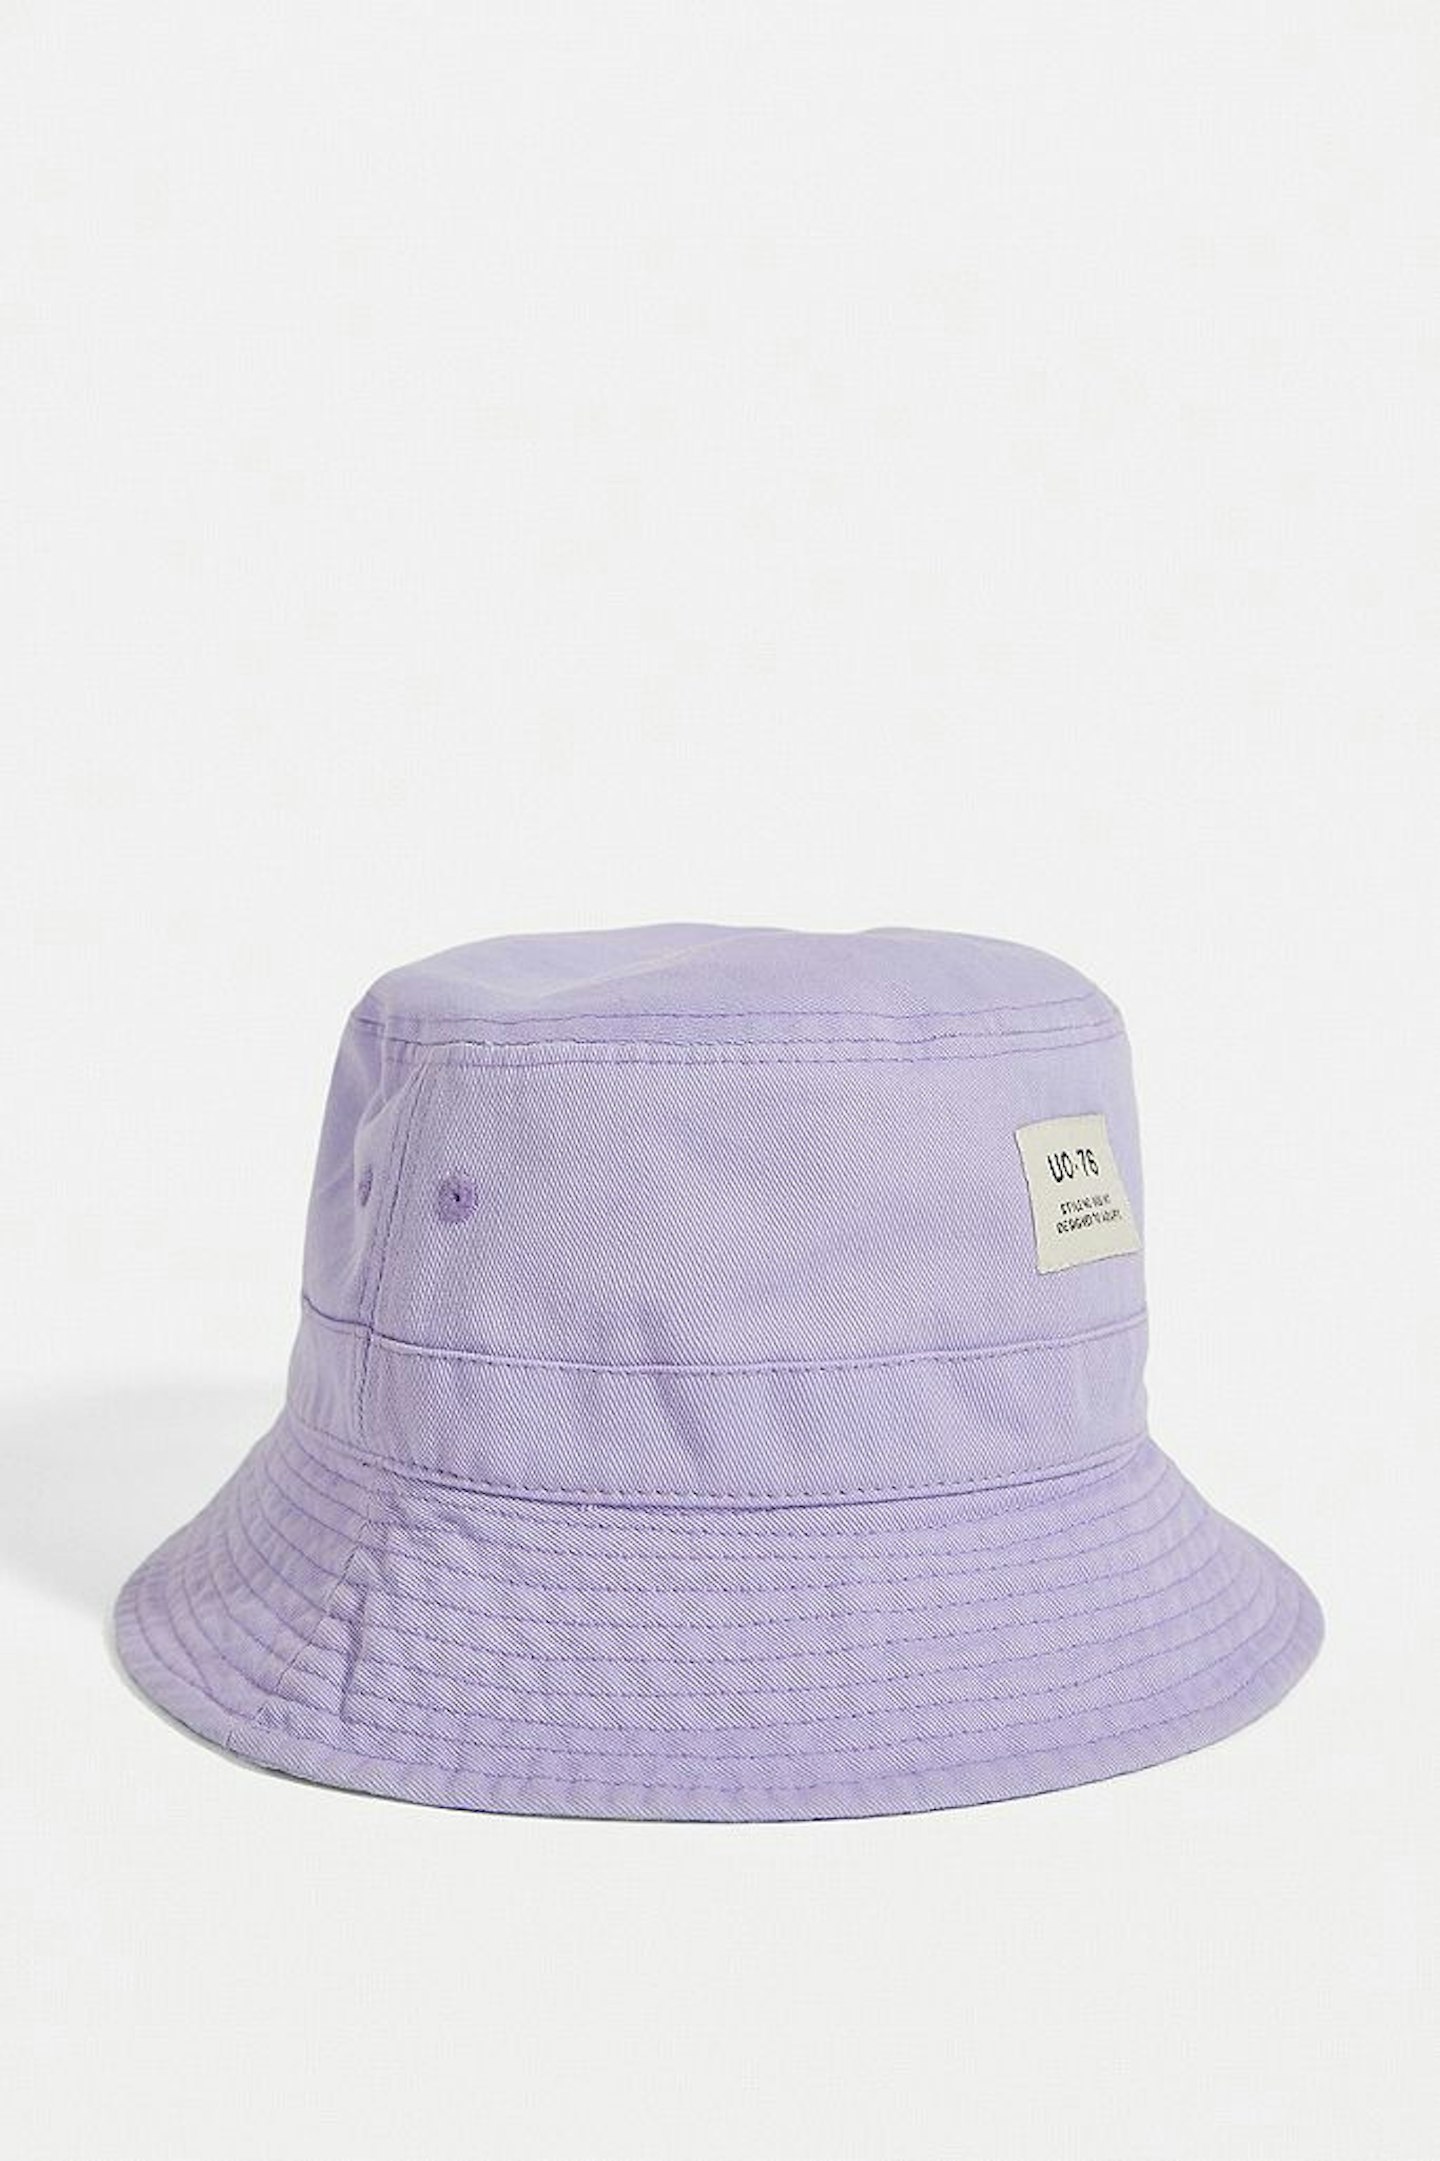 Urban Outfitters, Utility Bucket Hat, £18